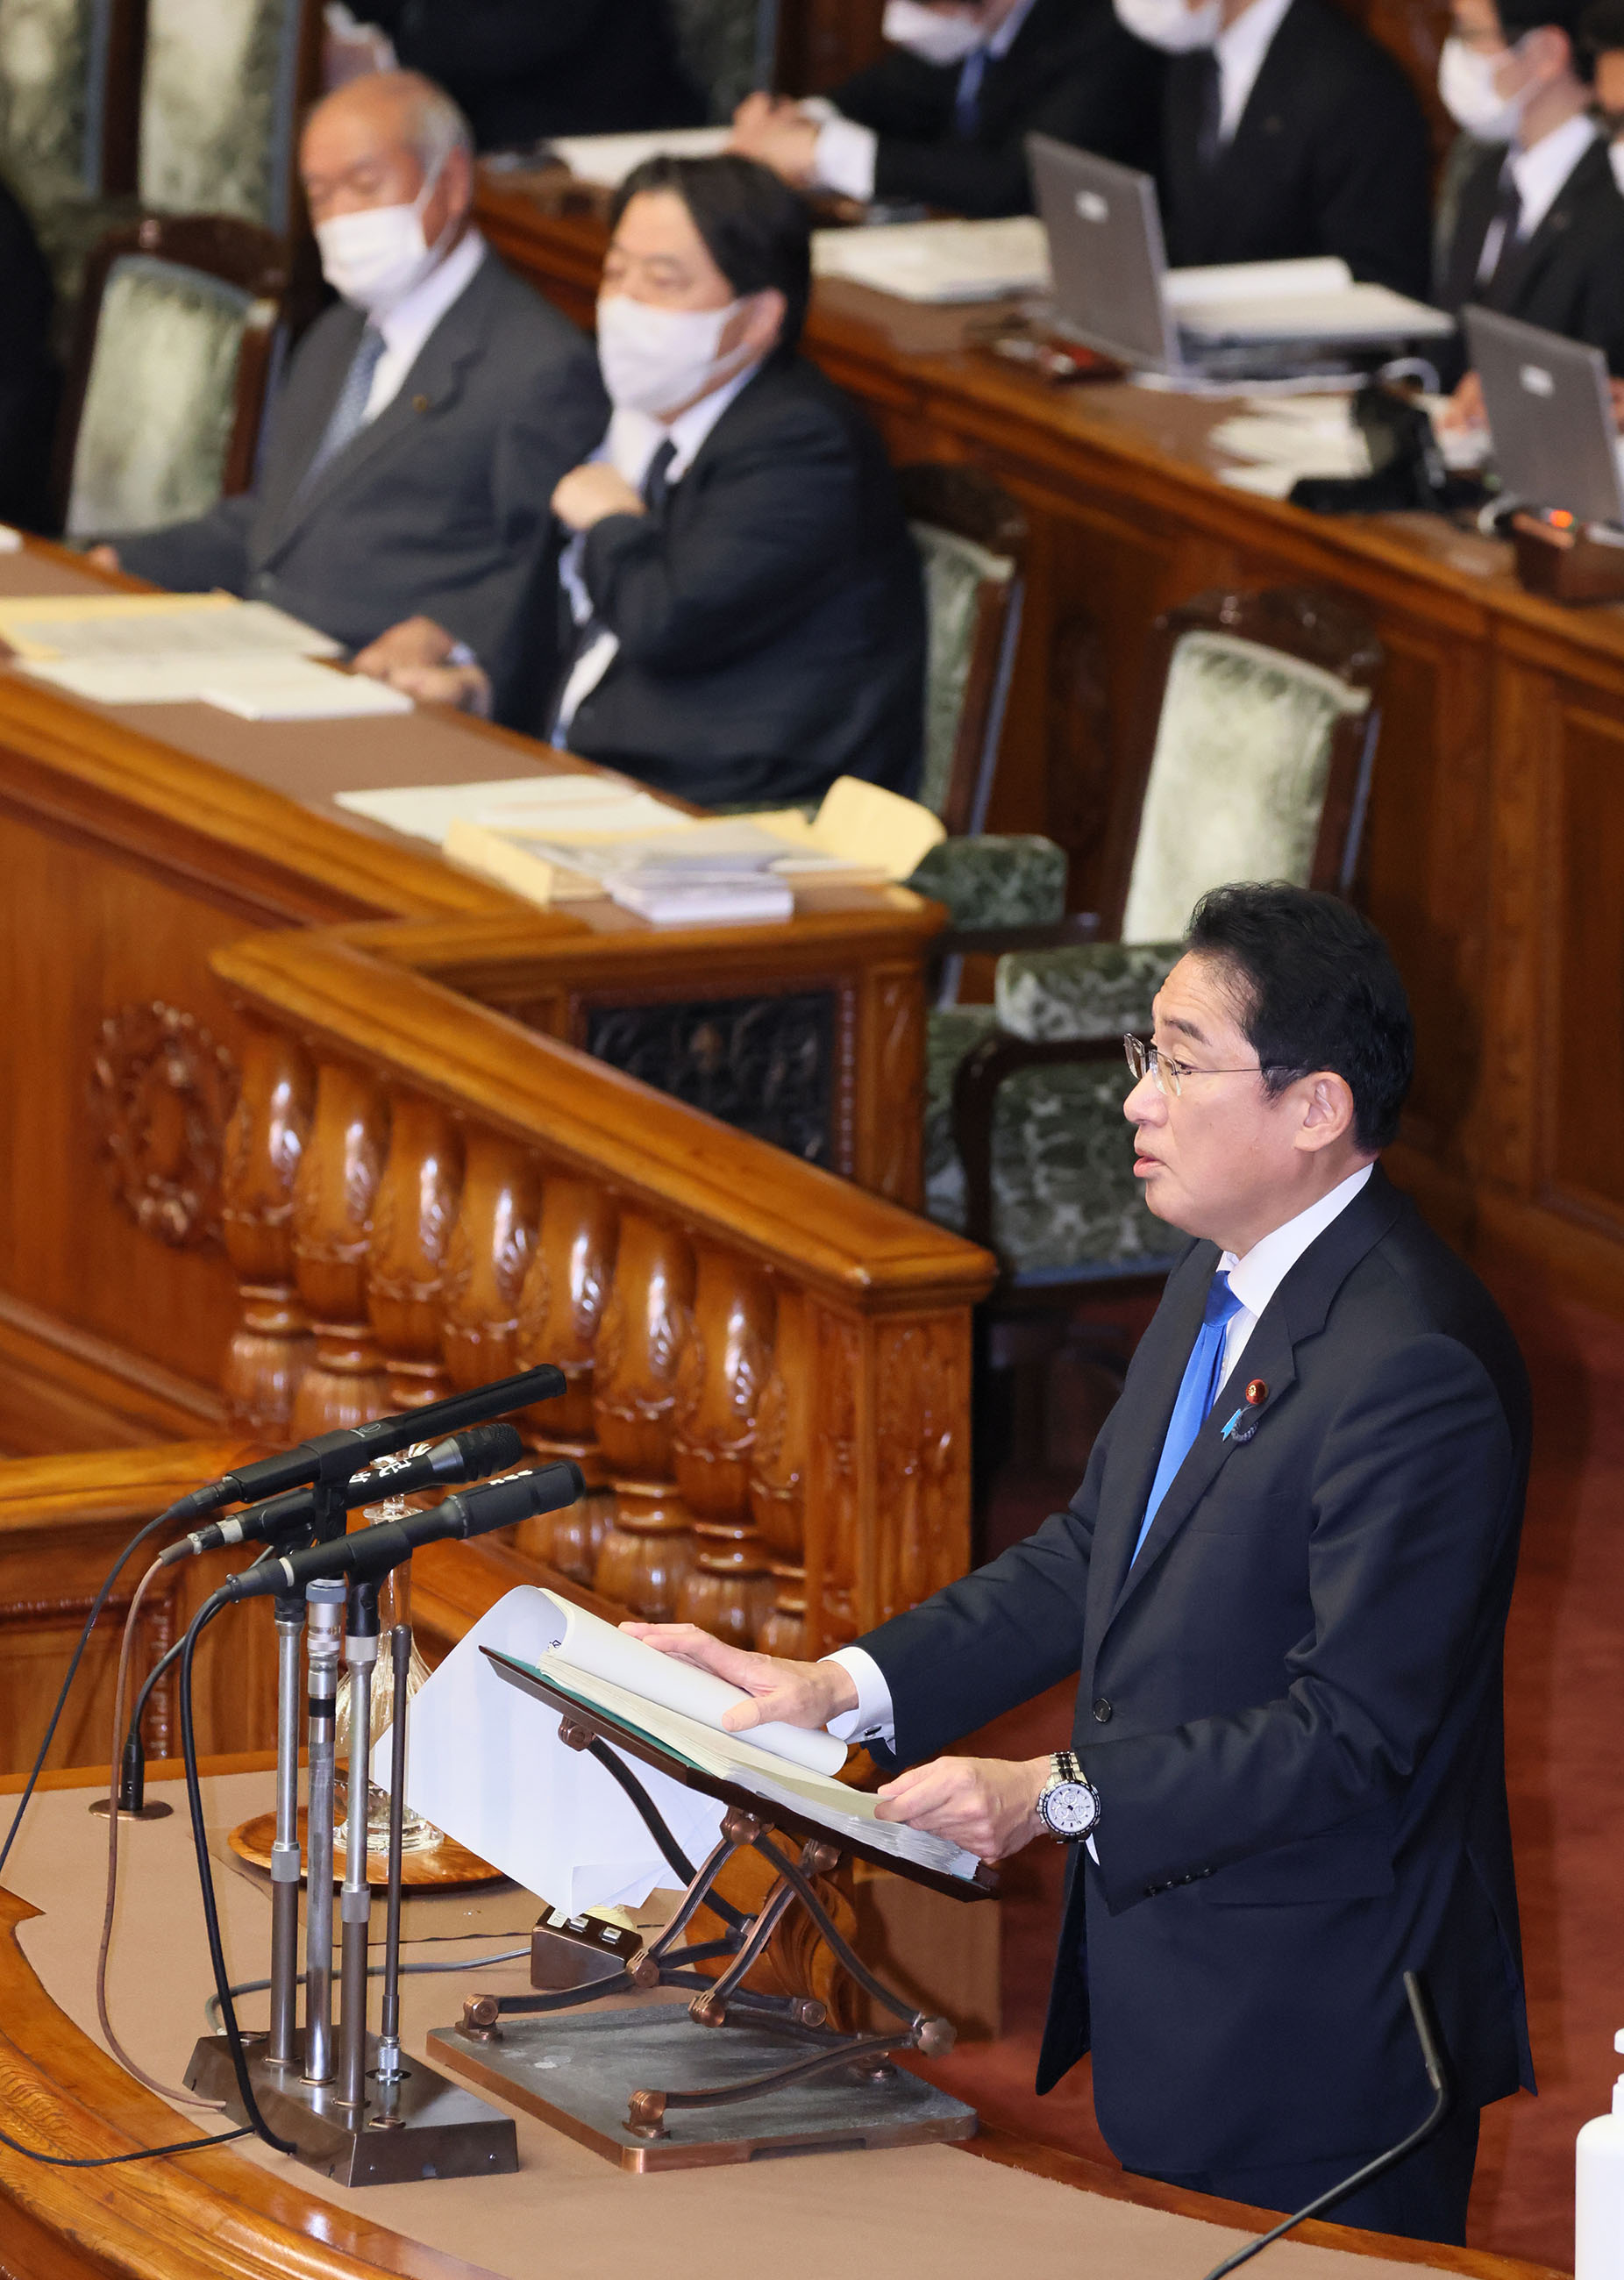 Prime Minister Kishida delivering a policy speech during the plenary session of the House of Councillors (7)